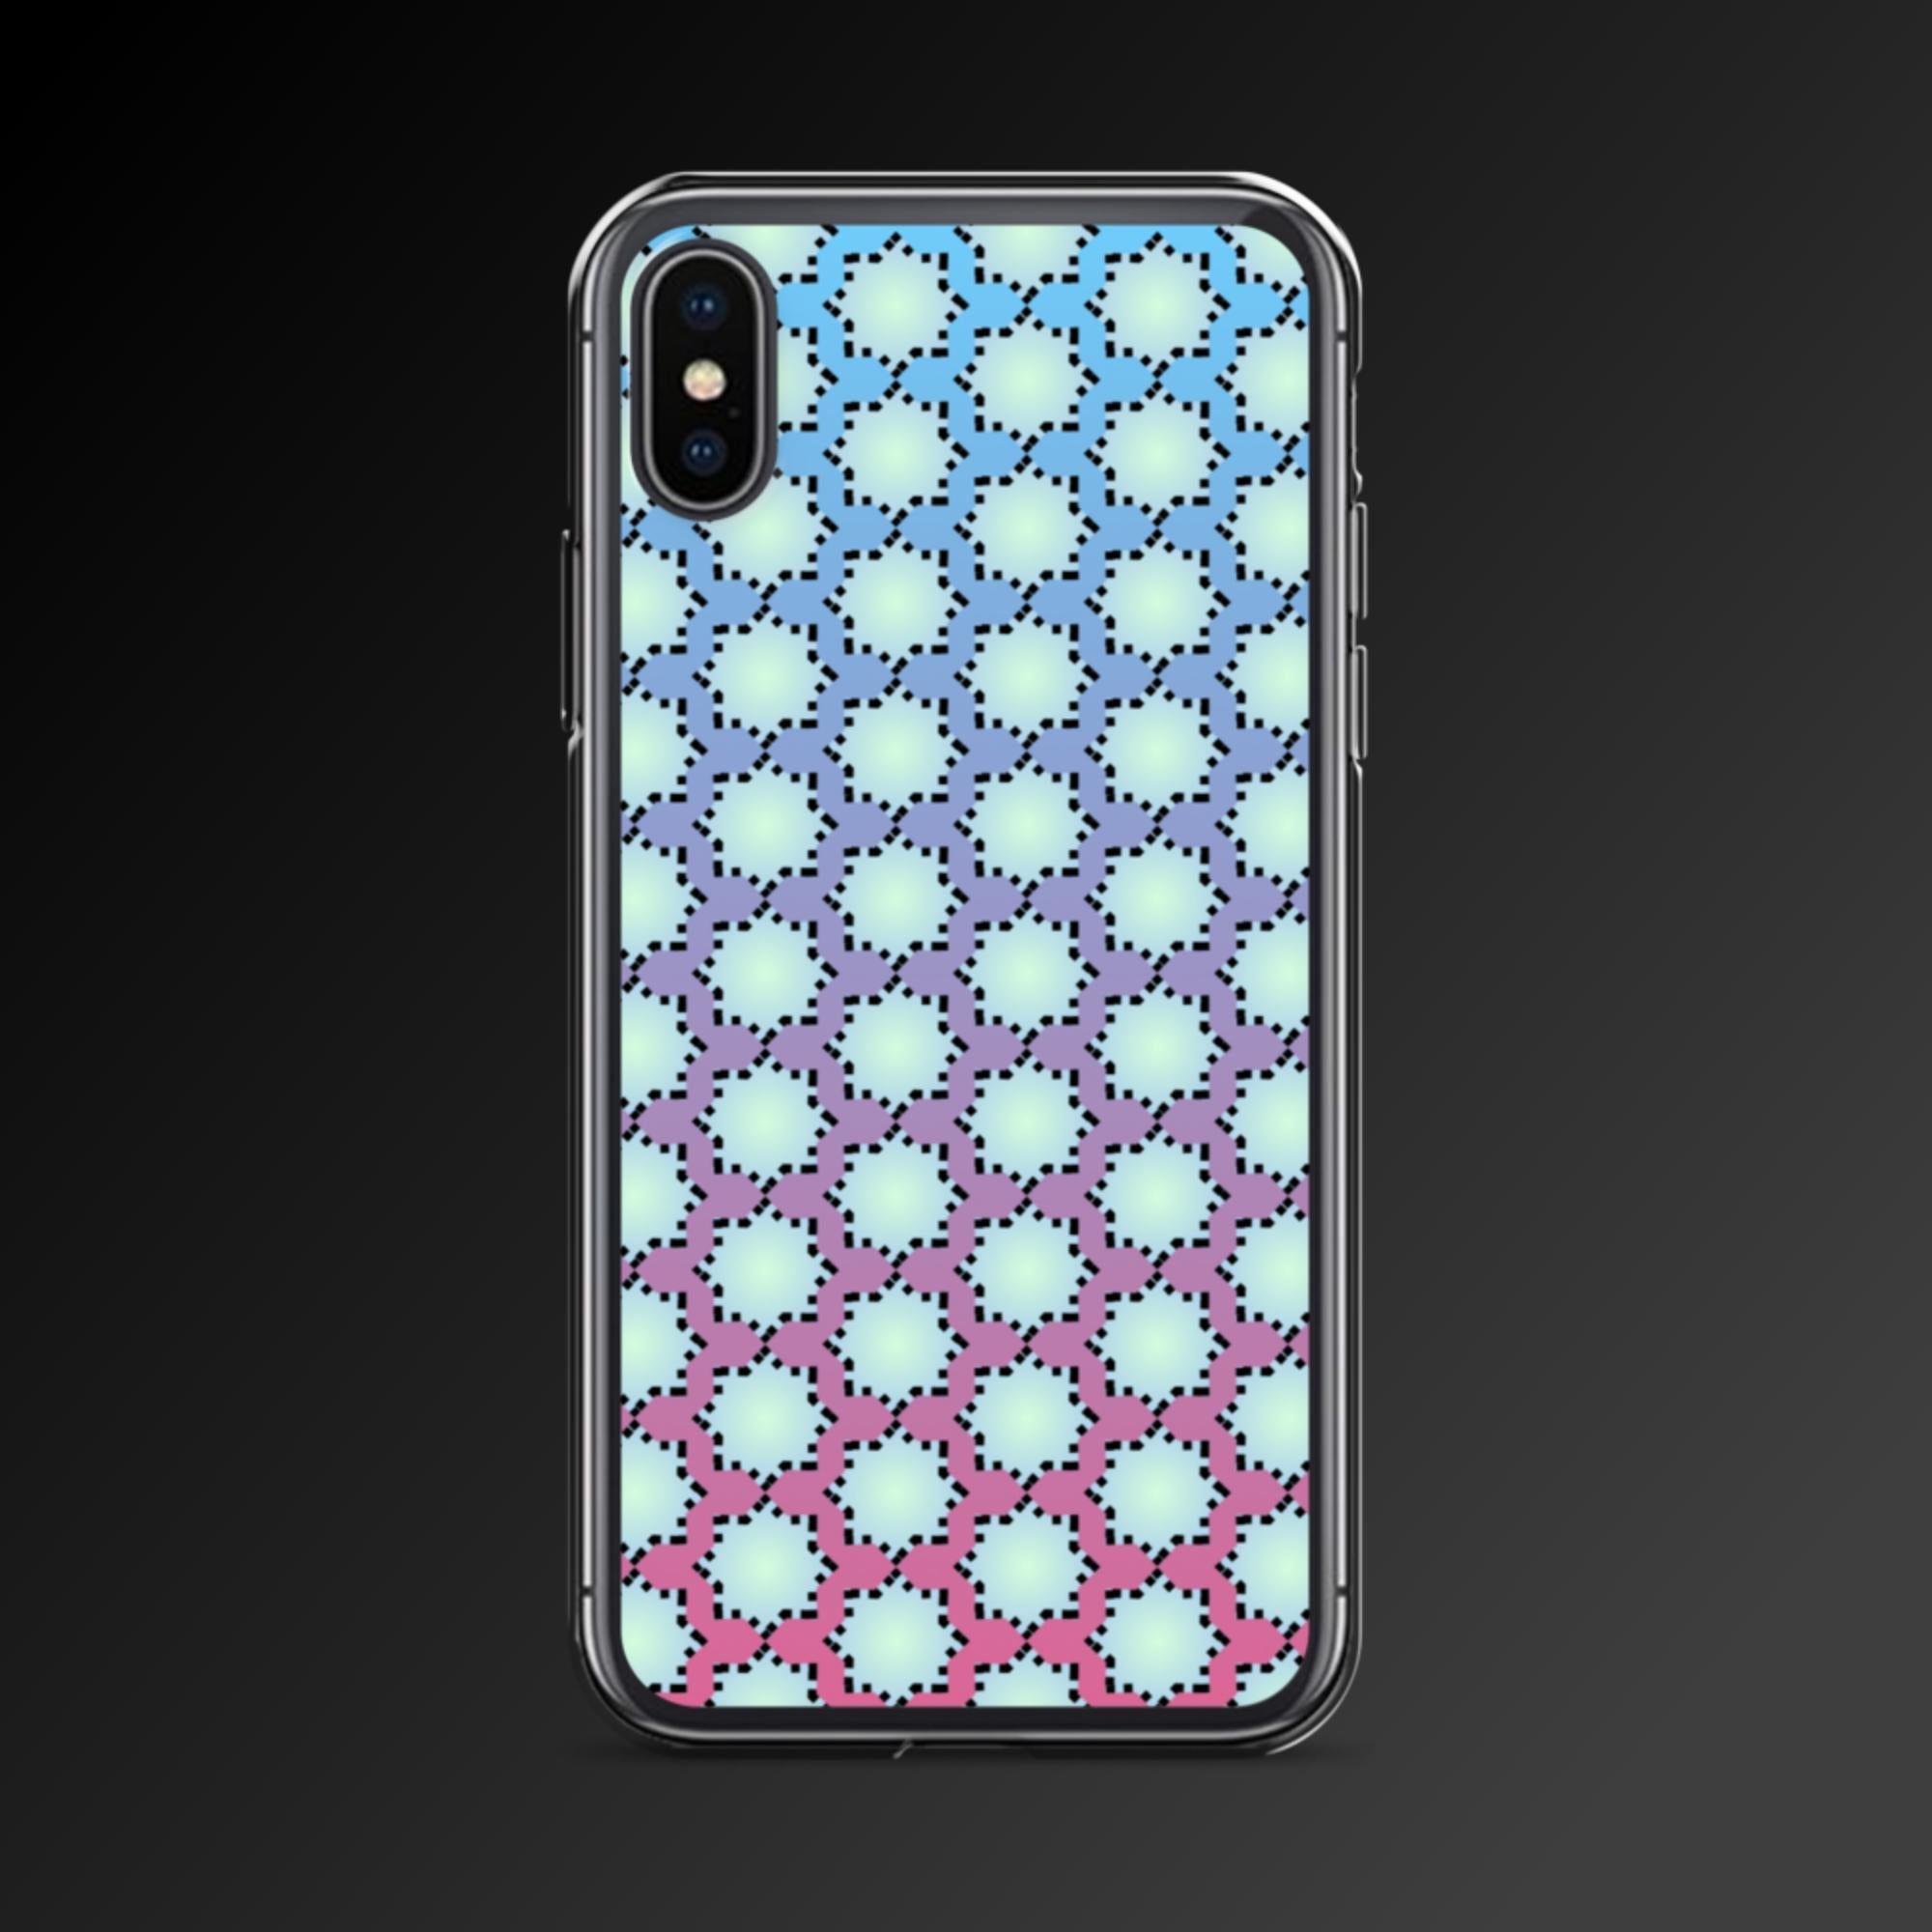 "Light flakes pattern" clear iphone case - Clear iphone case - Ever colorful